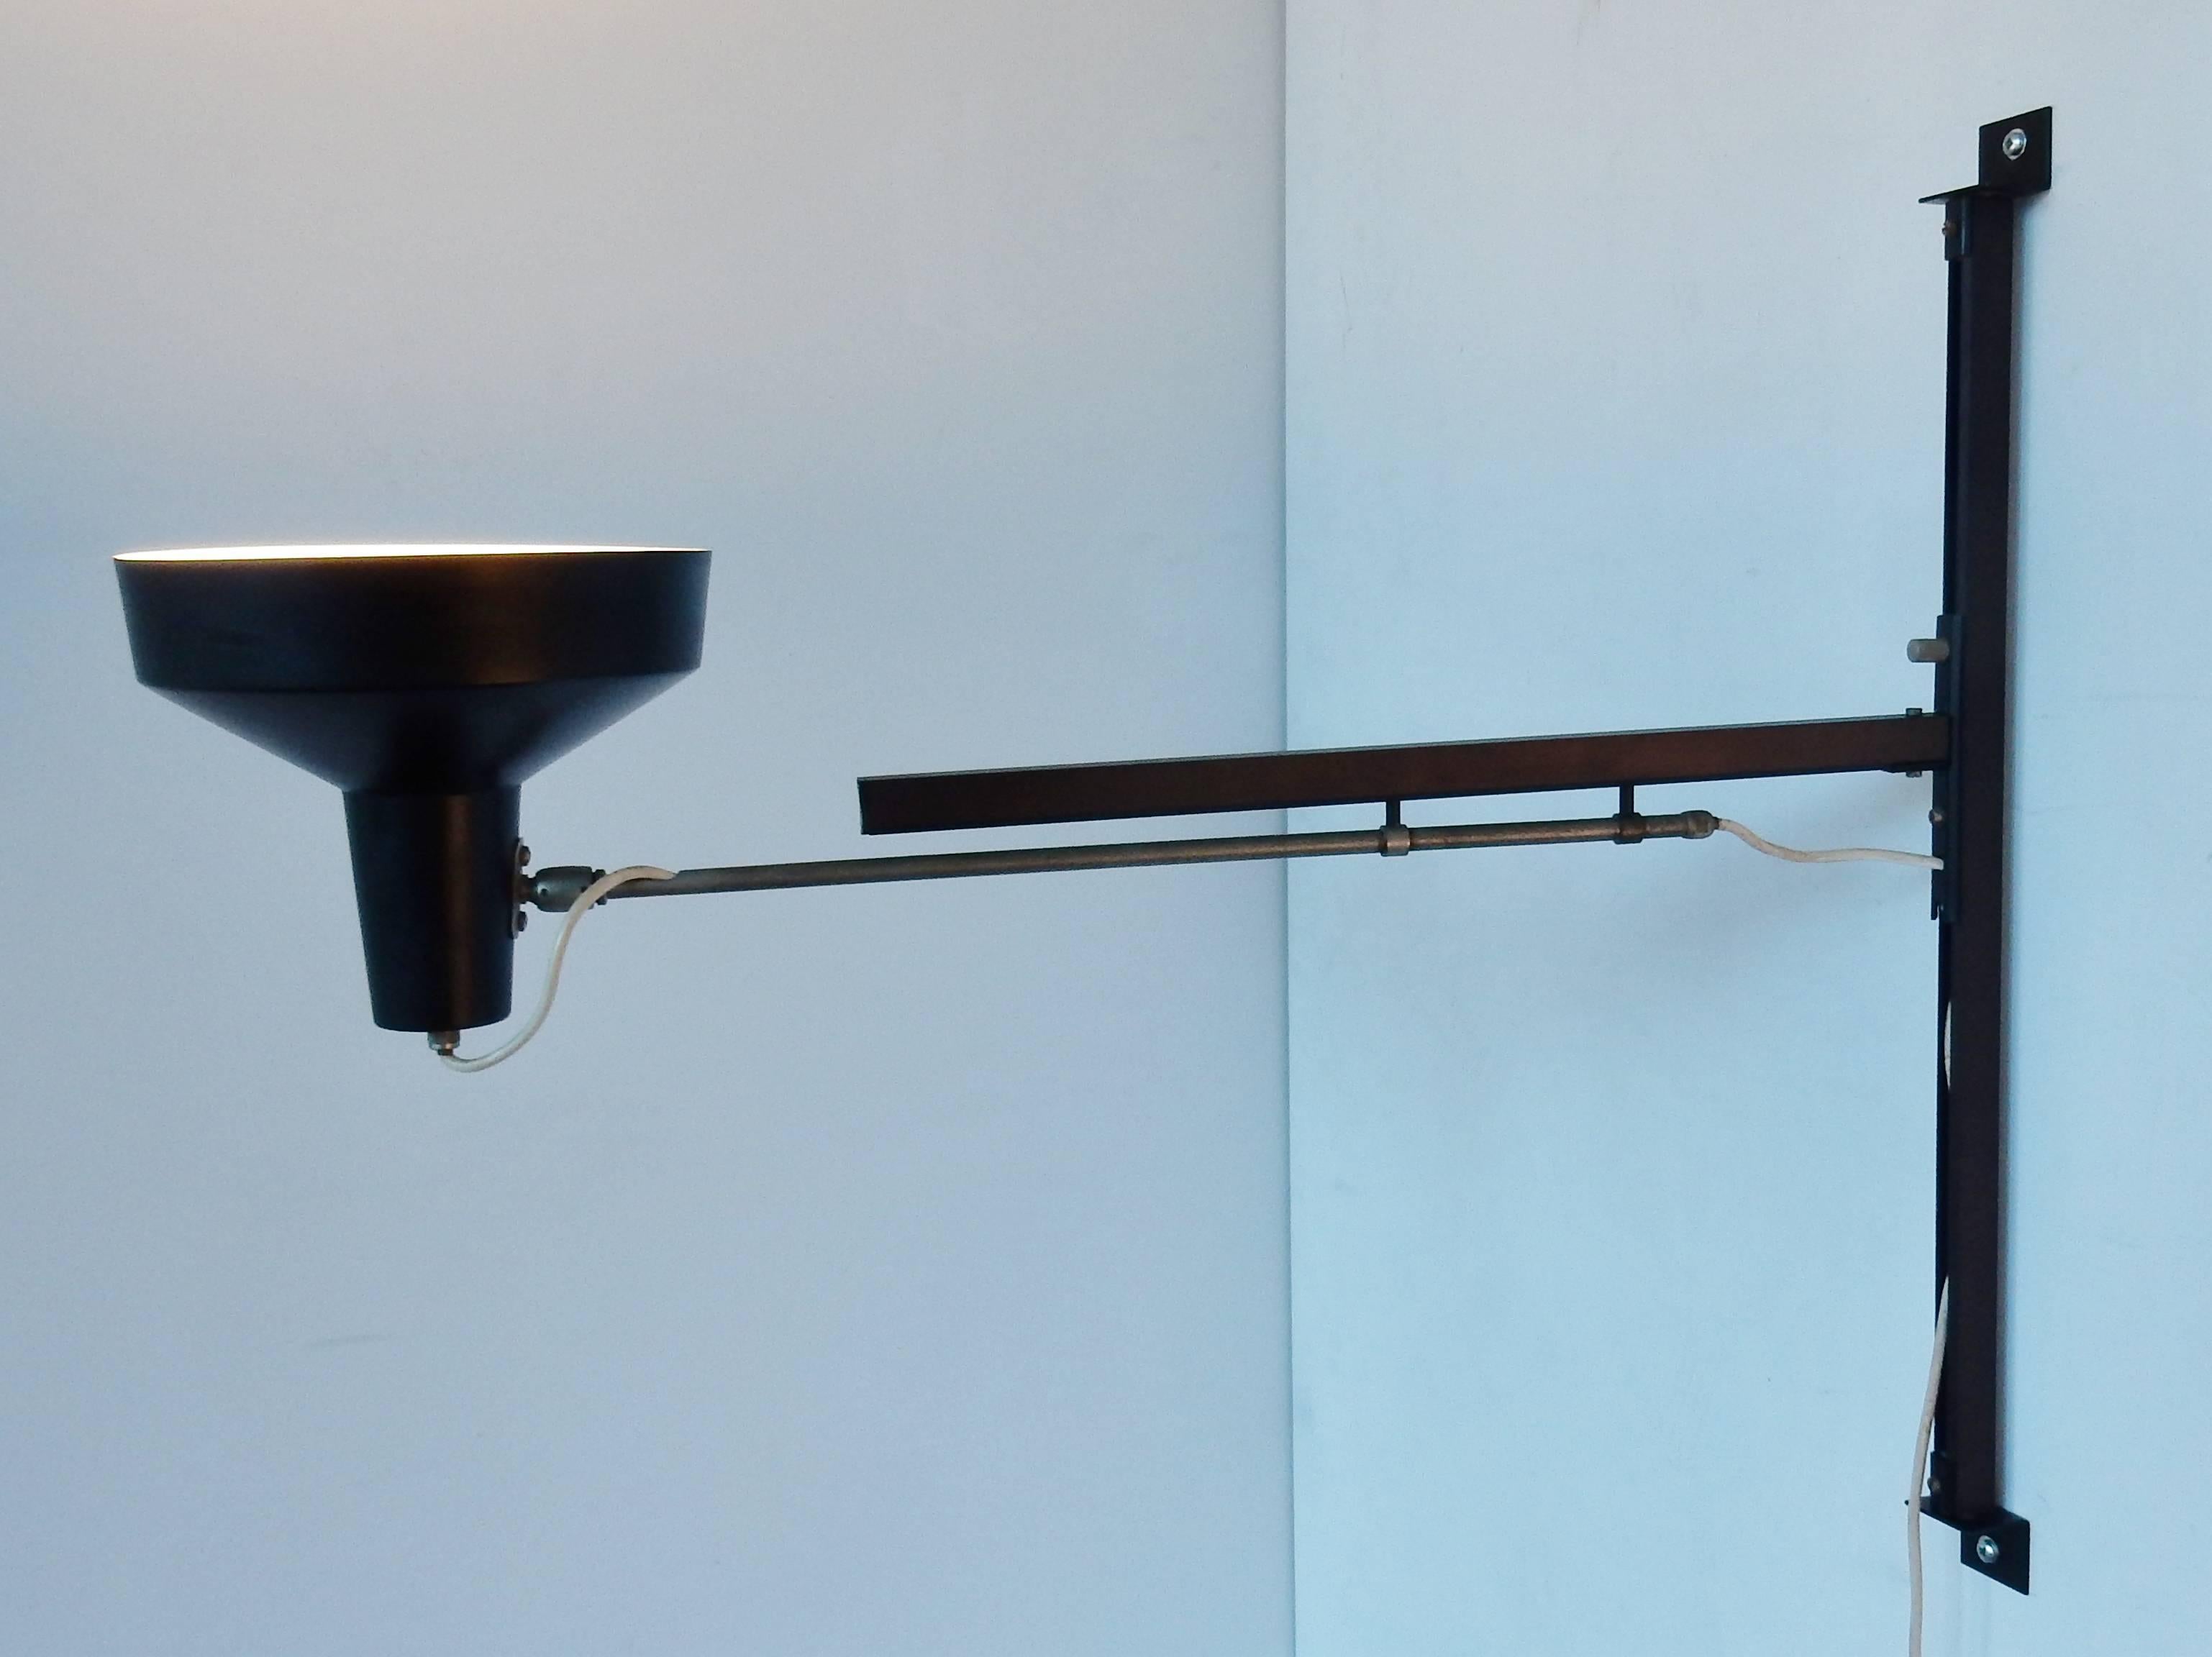 Lacquered Black Telescopic Wall Lamp by Hiemstra Evolux Dutch Design, Netherlands, 1960s For Sale